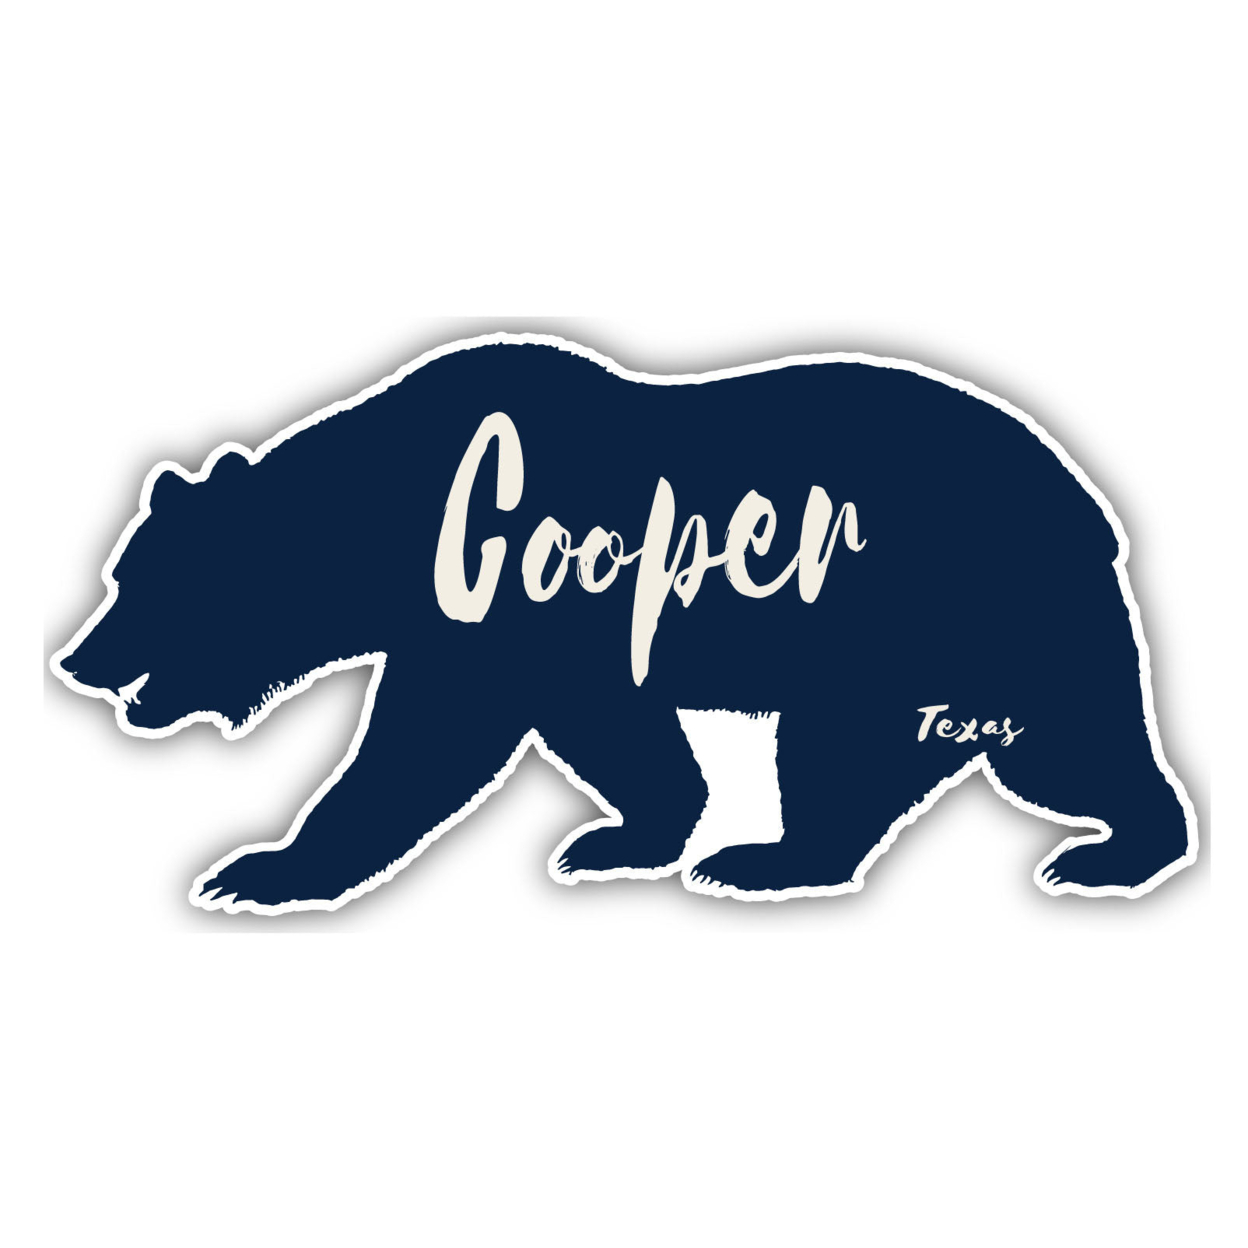 Cooper Texas Souvenir Decorative Stickers (Choose Theme And Size) - 4-Pack, 10-Inch, Bear